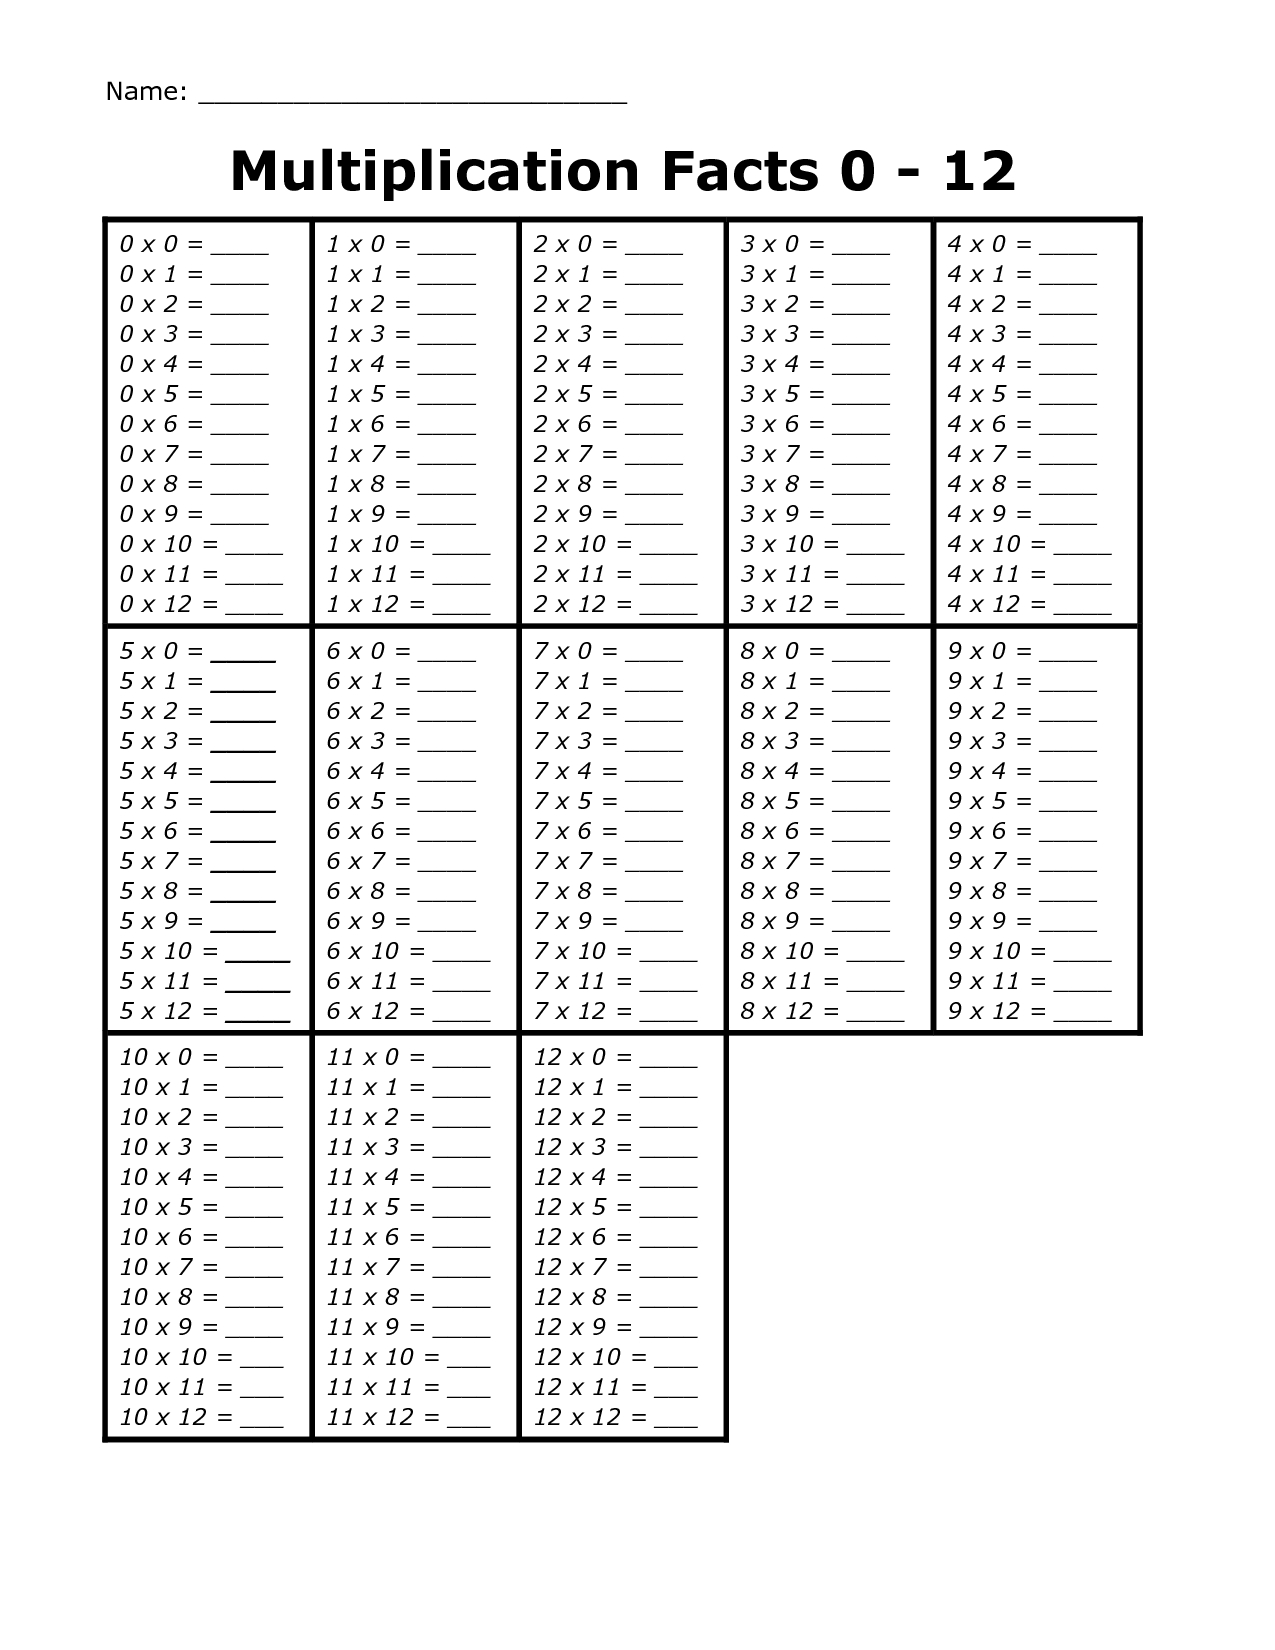 Printable Multiplication Facts 0 12 | Multiplication Facts inside Printable Multiplication Facts Quiz